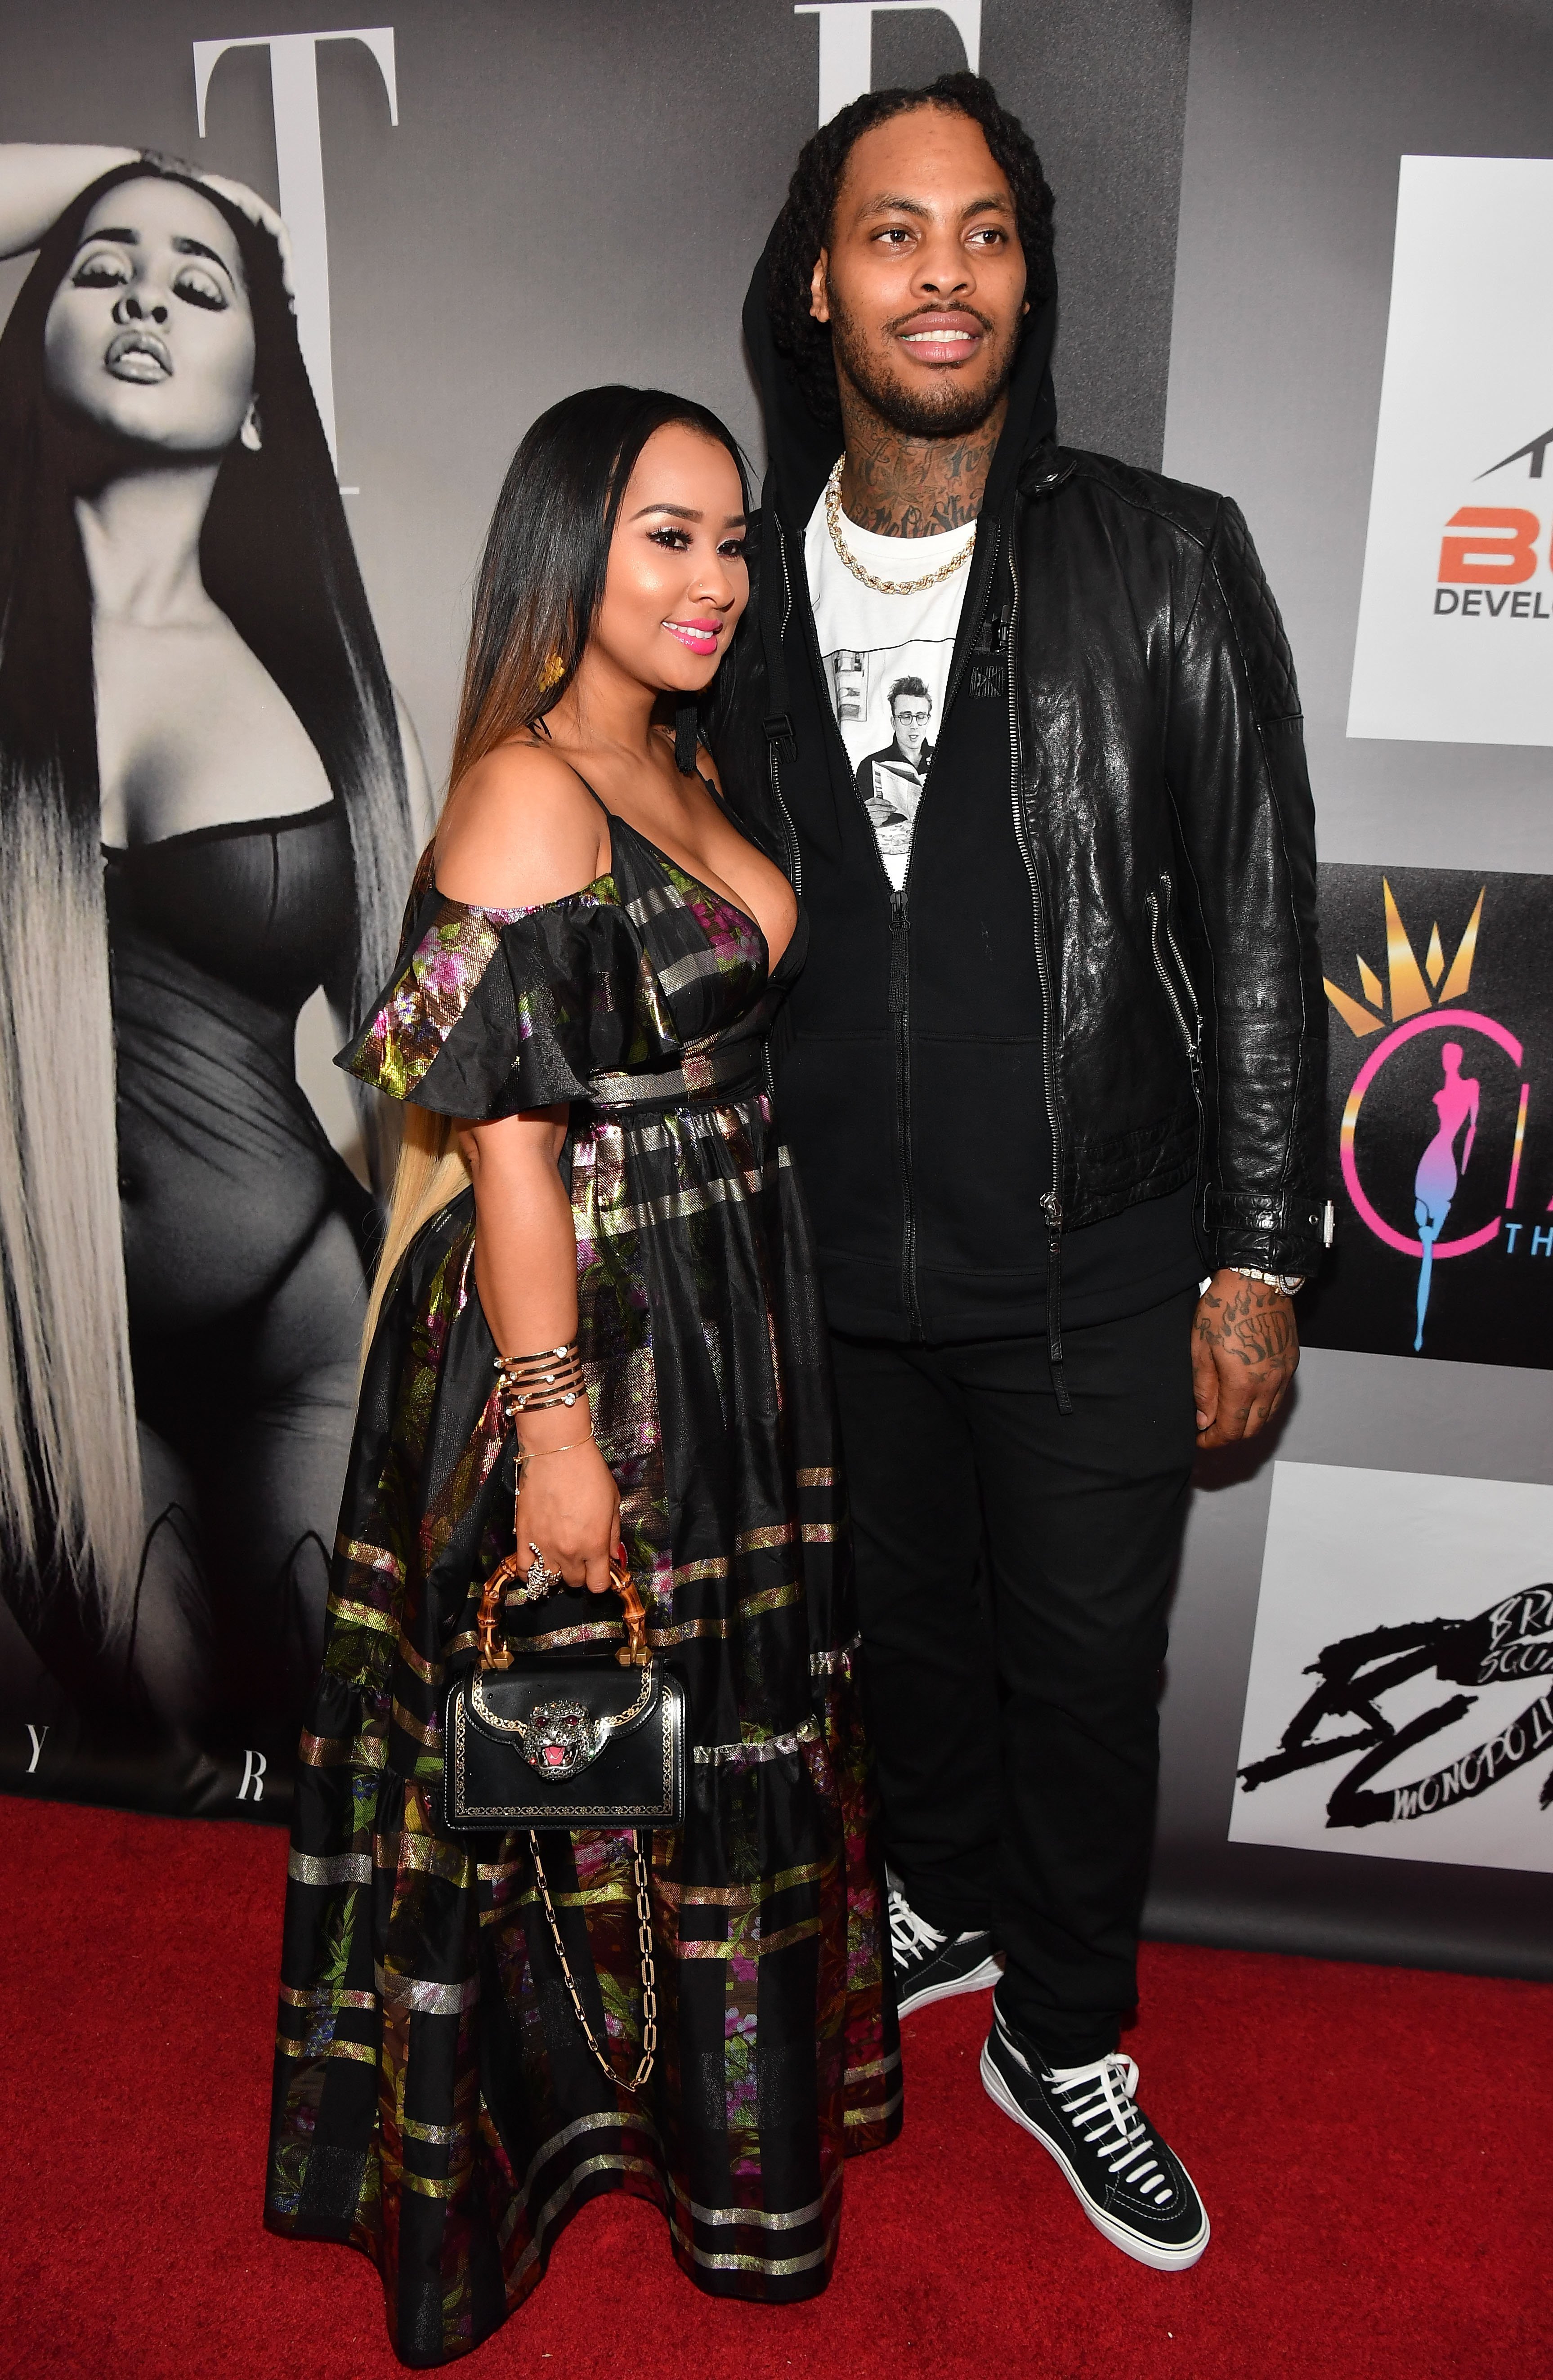 Tammy Rivera and Waka Flocka at the release party of Tammy's "Fate" EP in April 2018. | Photo: Getty Images